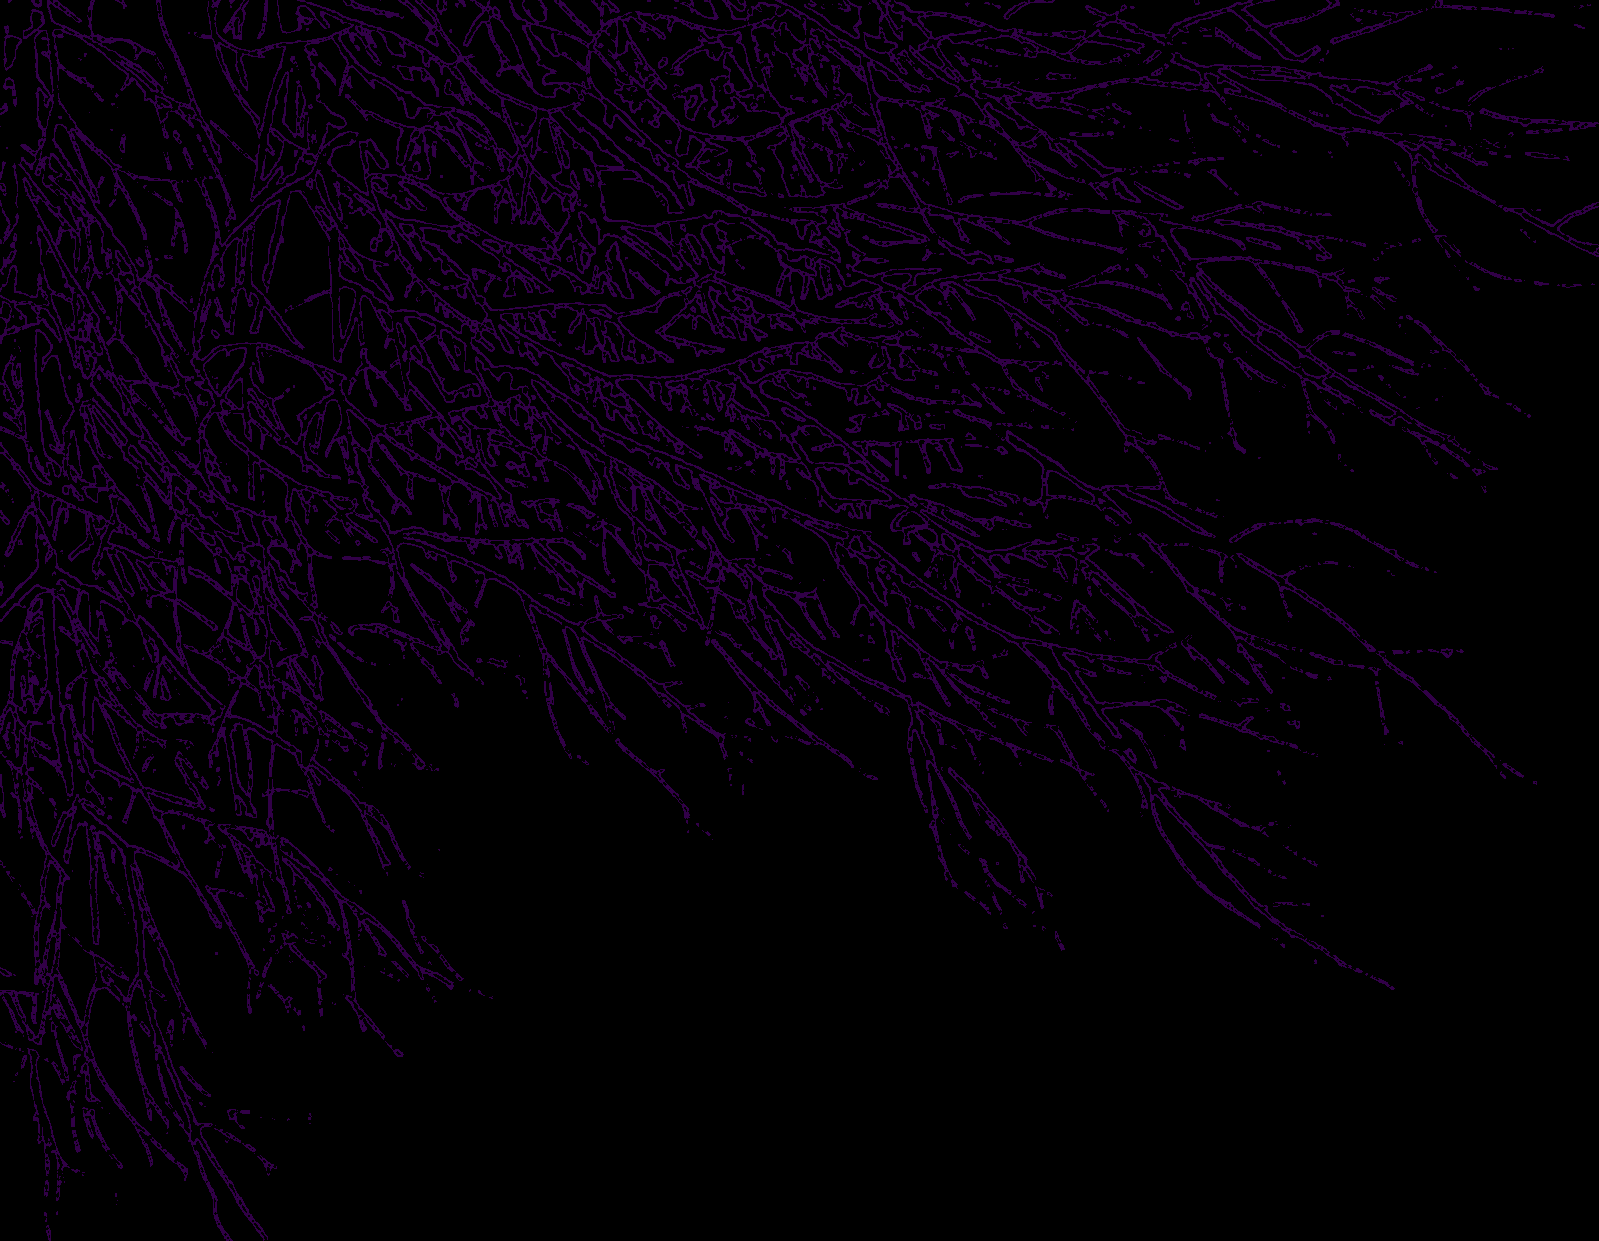 Pretty Dark Purple Backgrounds Images amp Pictures   Becuo 1599x1241